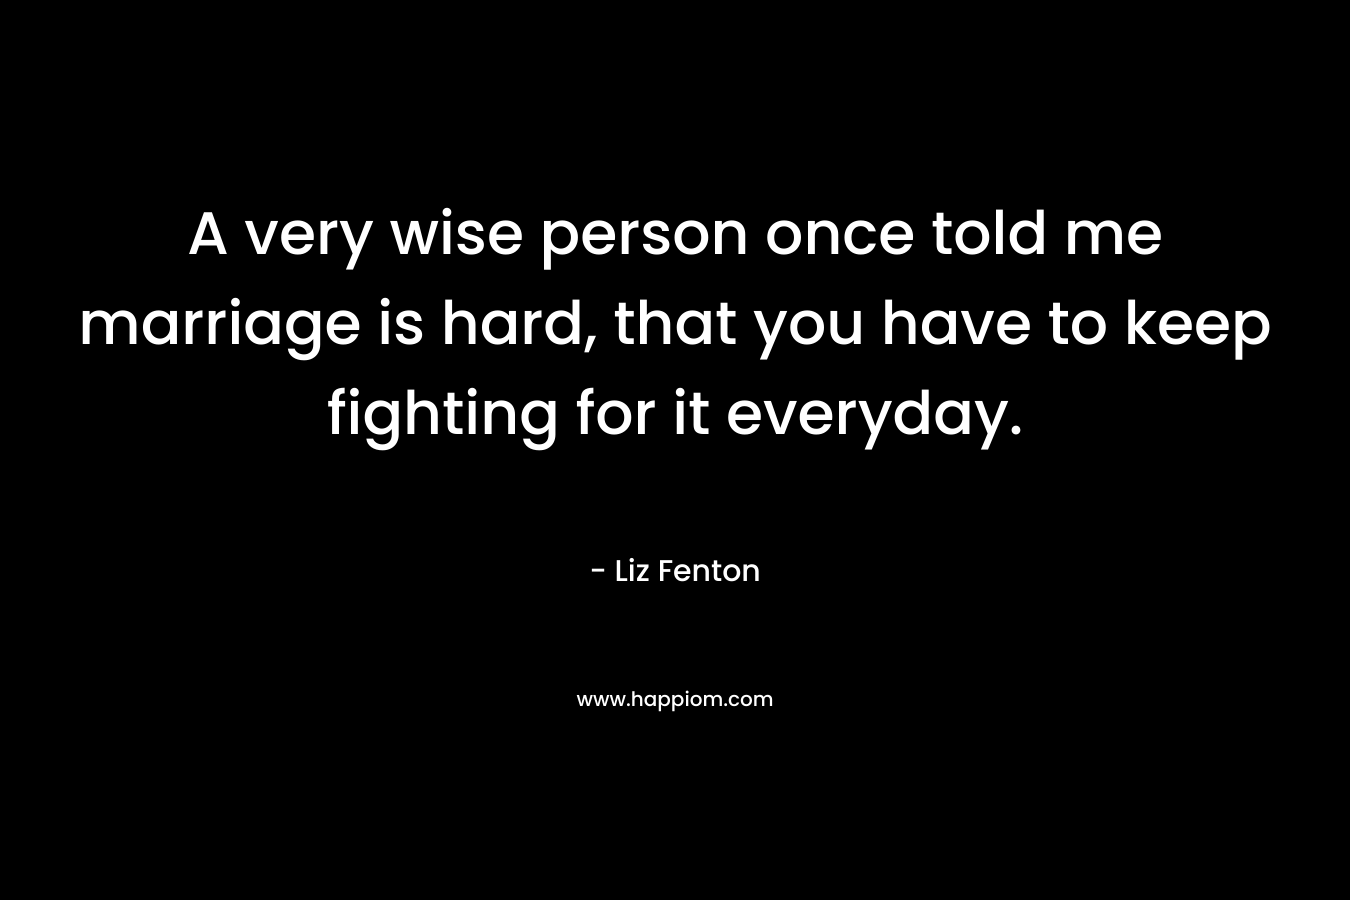 A very wise person once told me marriage is hard, that you have to keep fighting for it everyday.